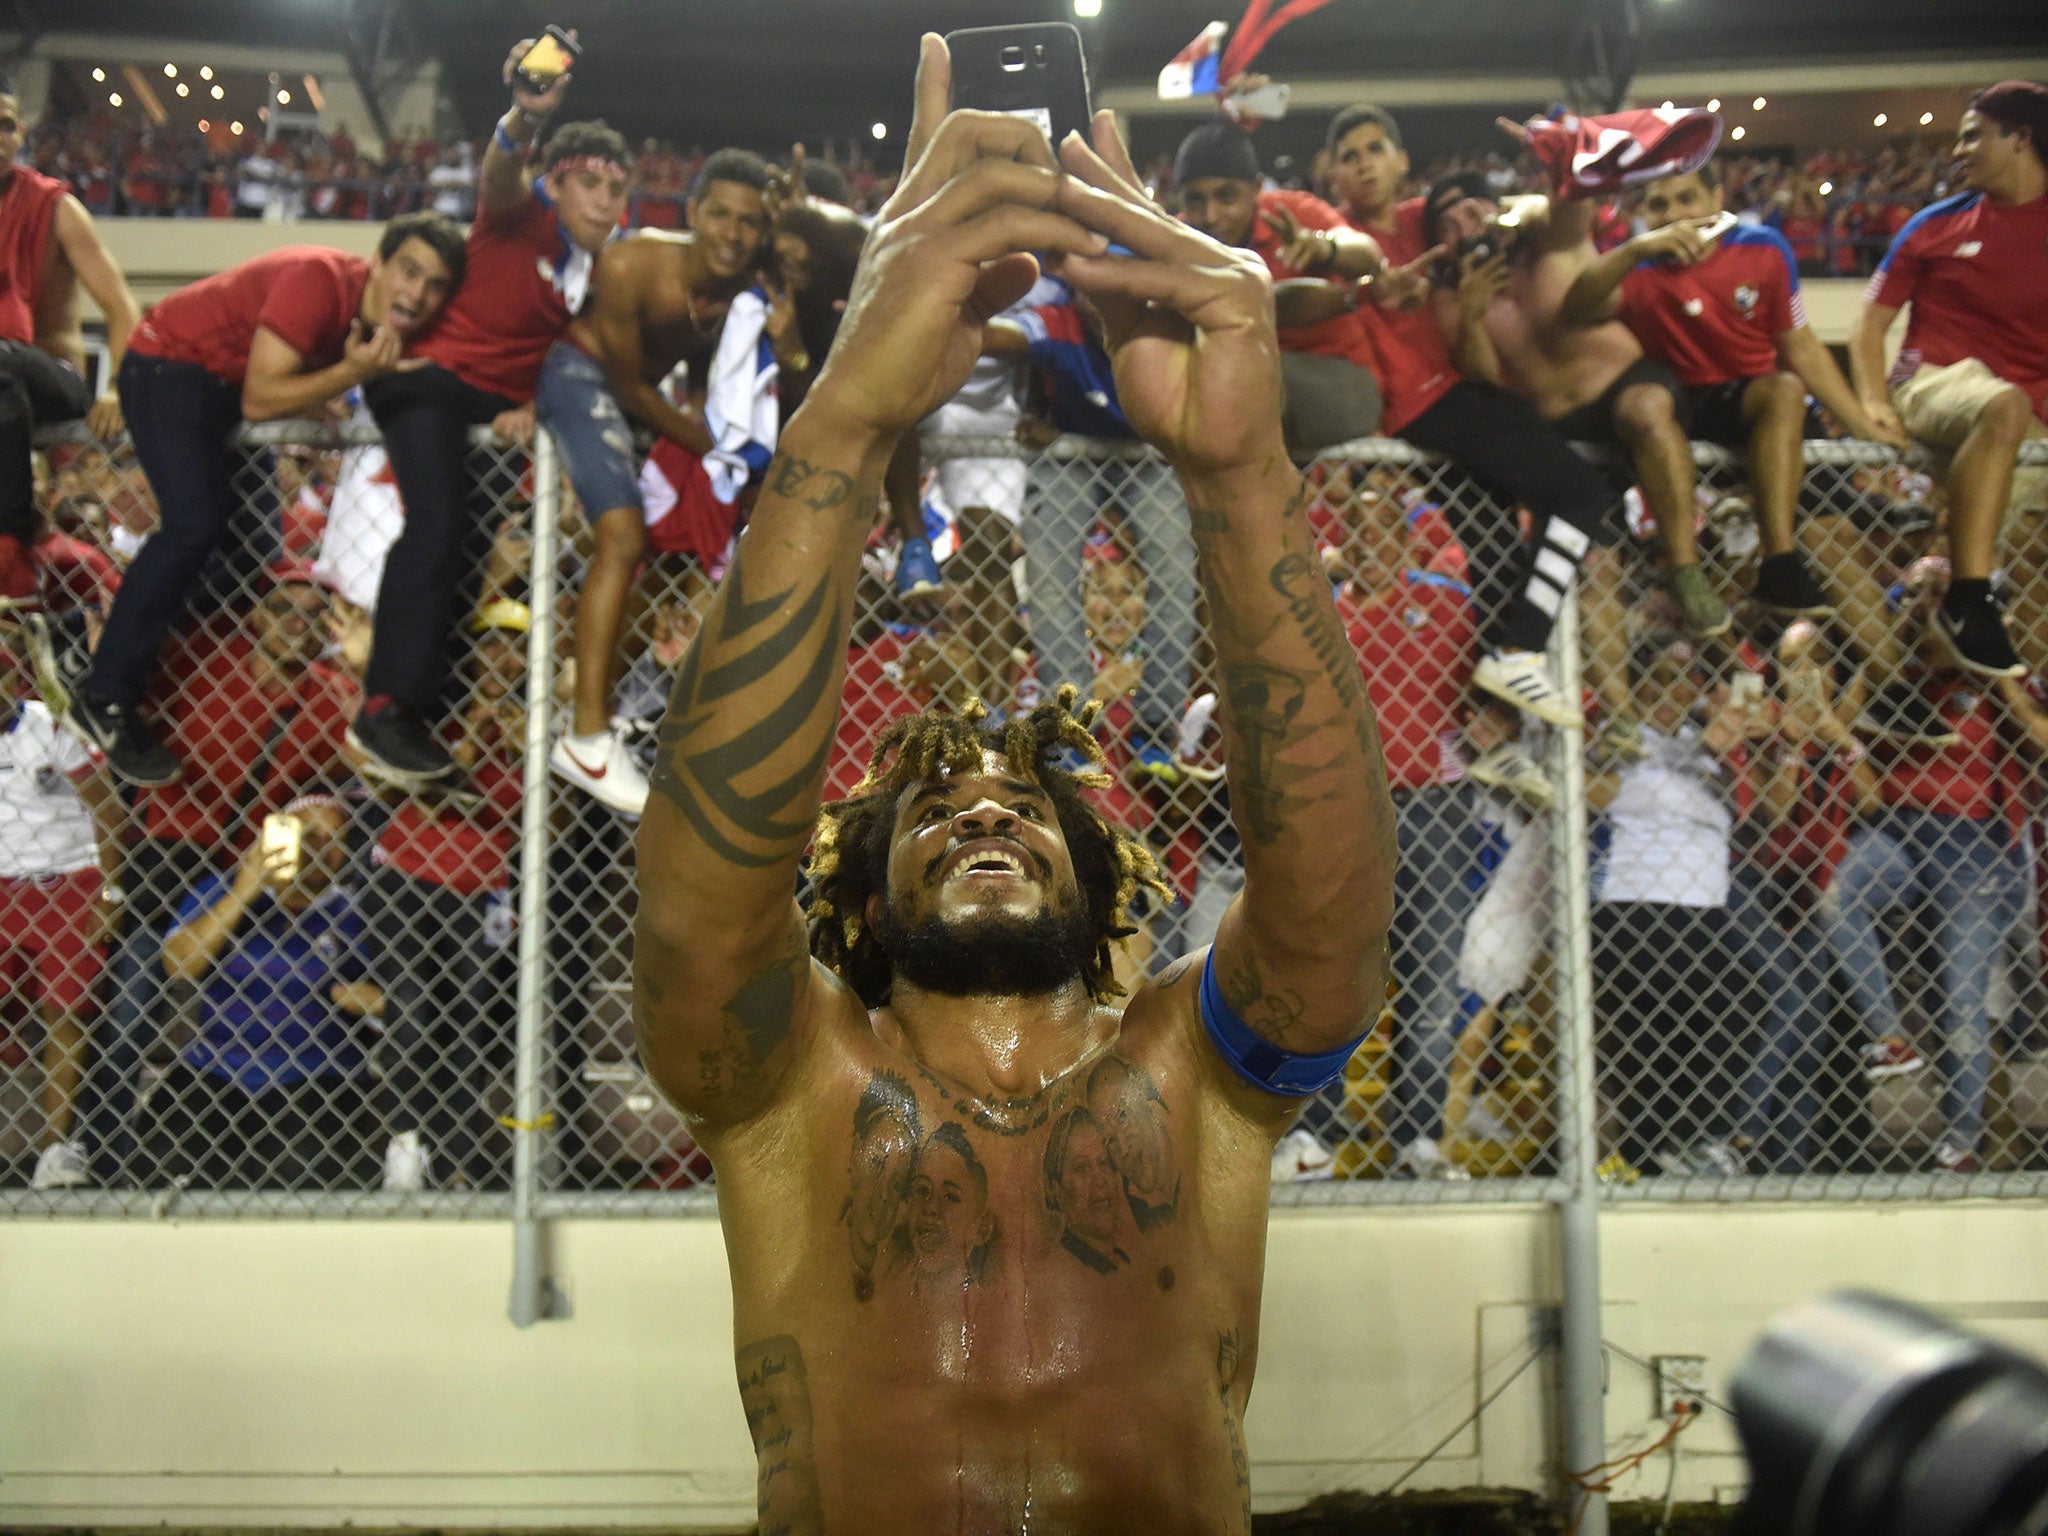 Hero of the night Roman Torres celebrates victory with the Panama fans